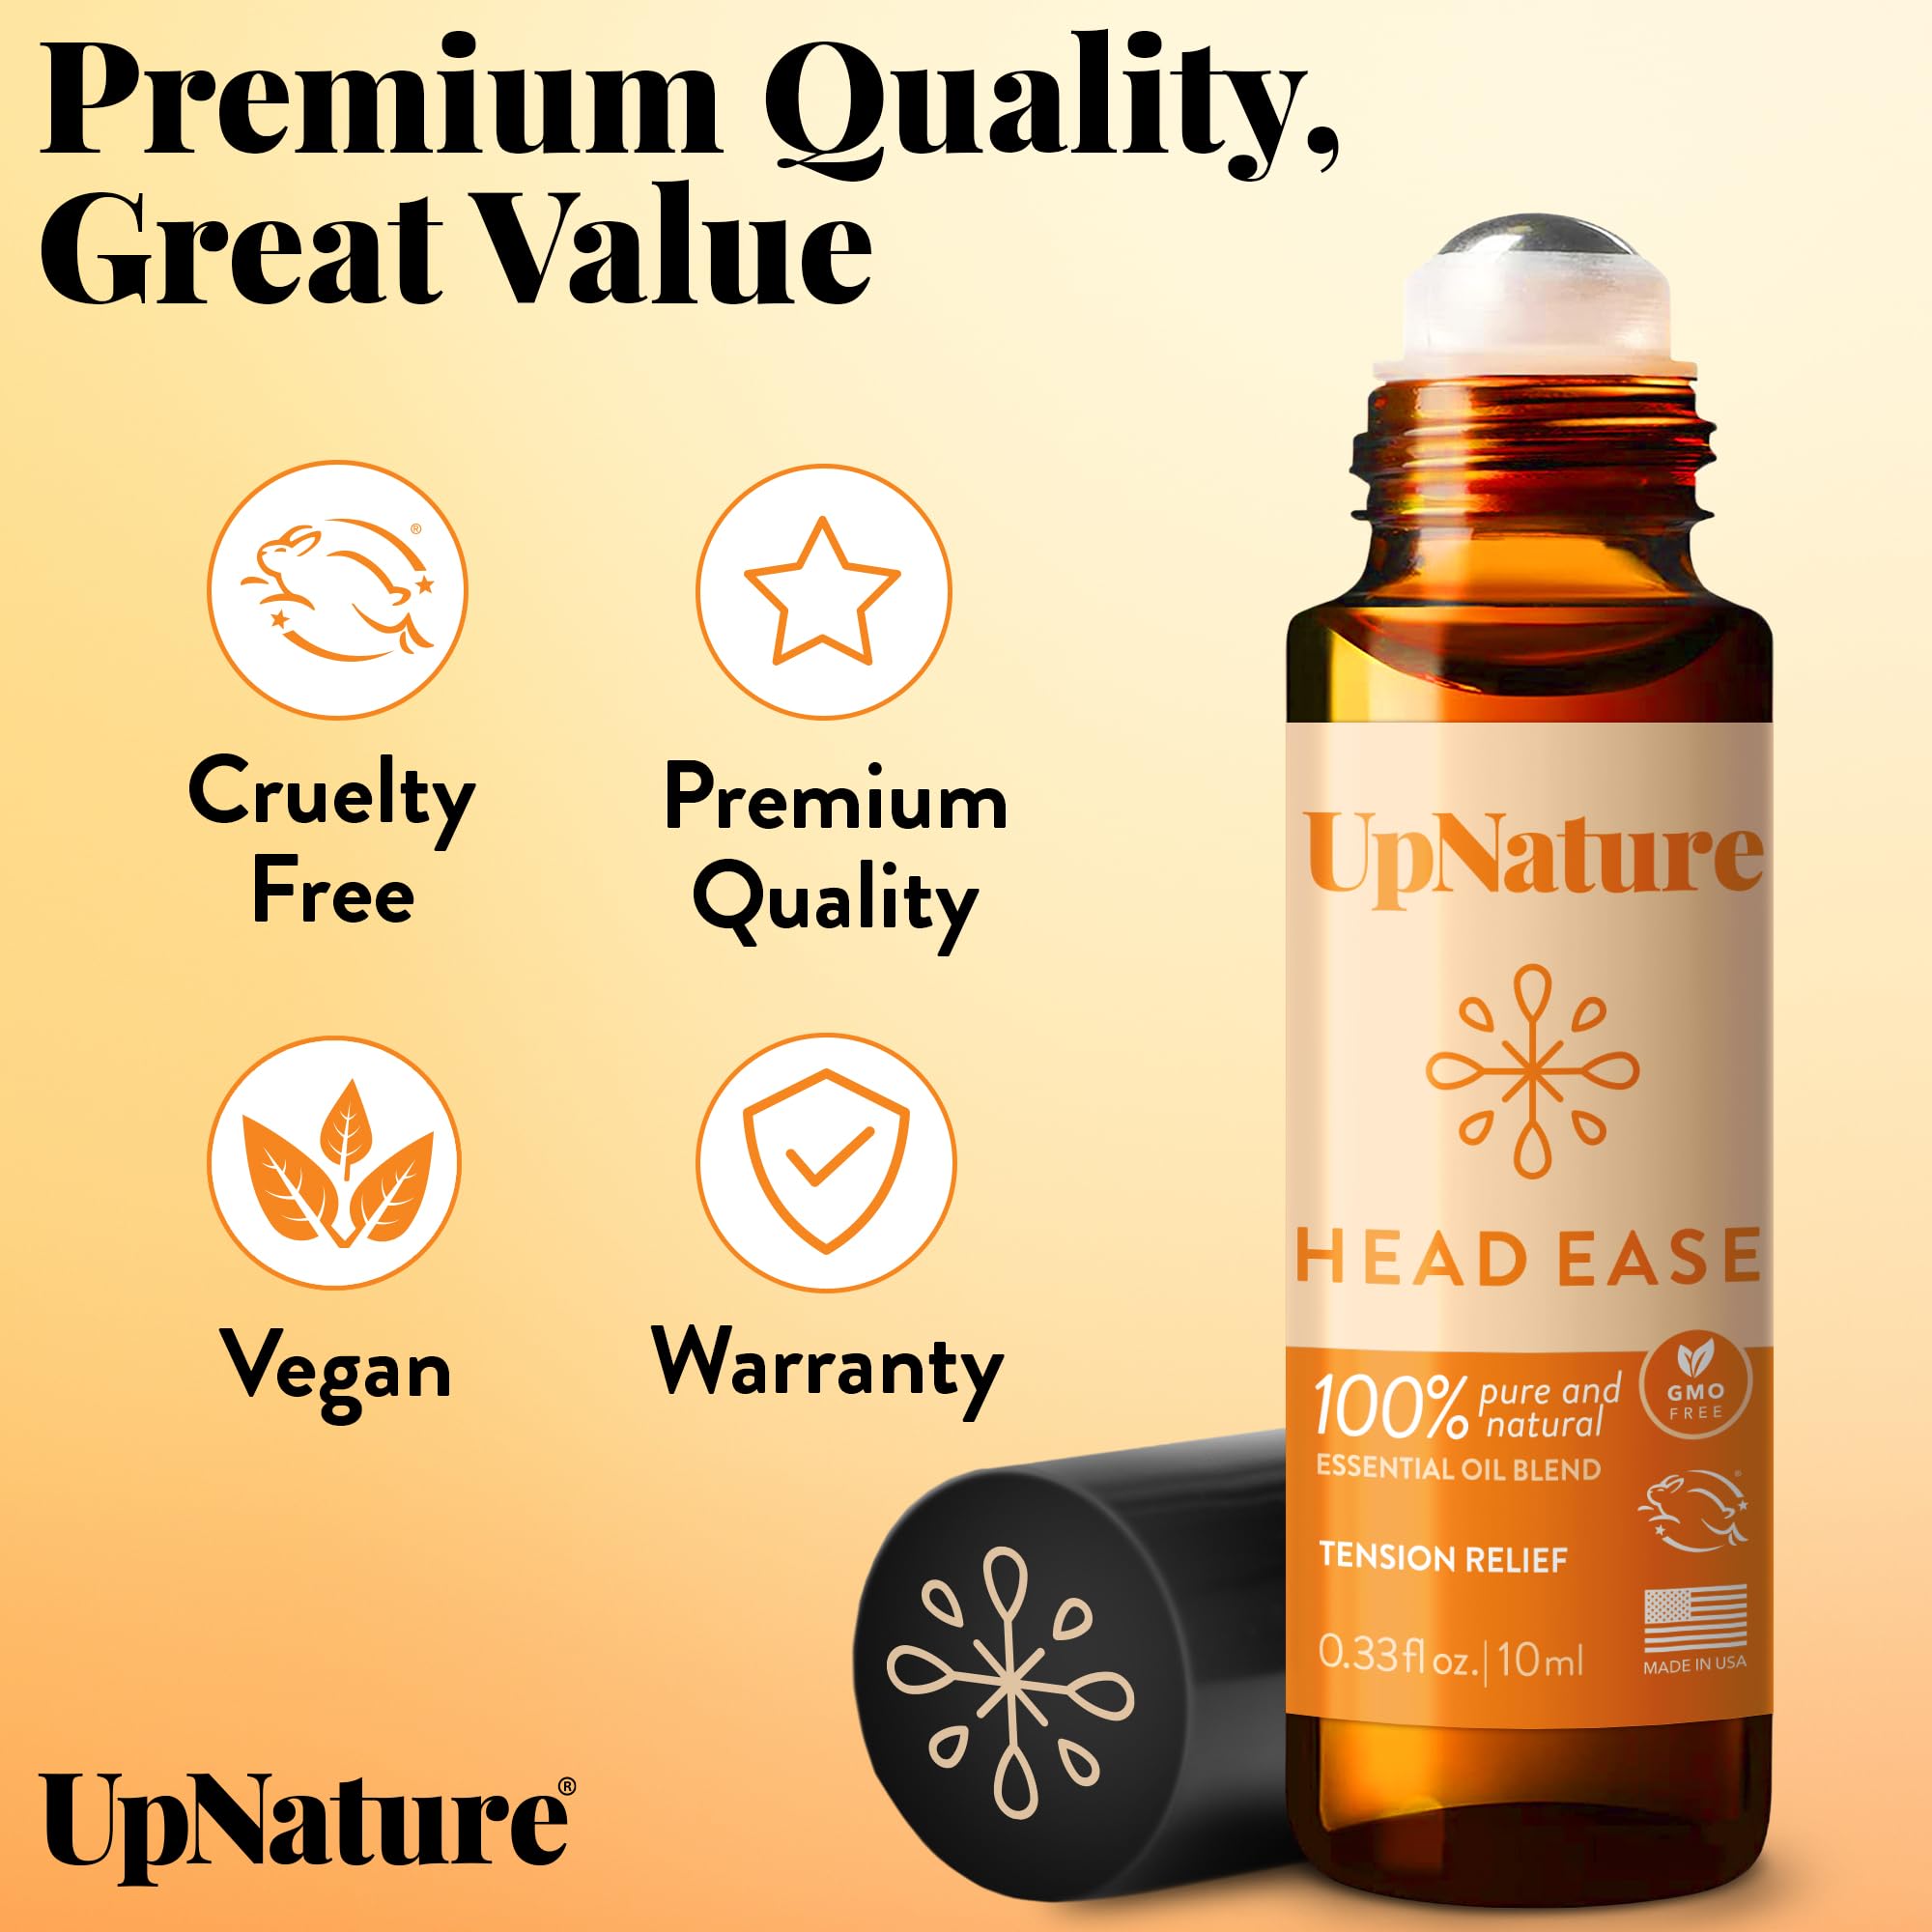 Head Ease Essential Oil Roll On Blend   Natural Head Tension Relief with Peppermint Oil, Rosemary Oil & Frankincense Oil Therapeutic Grade   Relaxing Aromatherapy Essential Oil